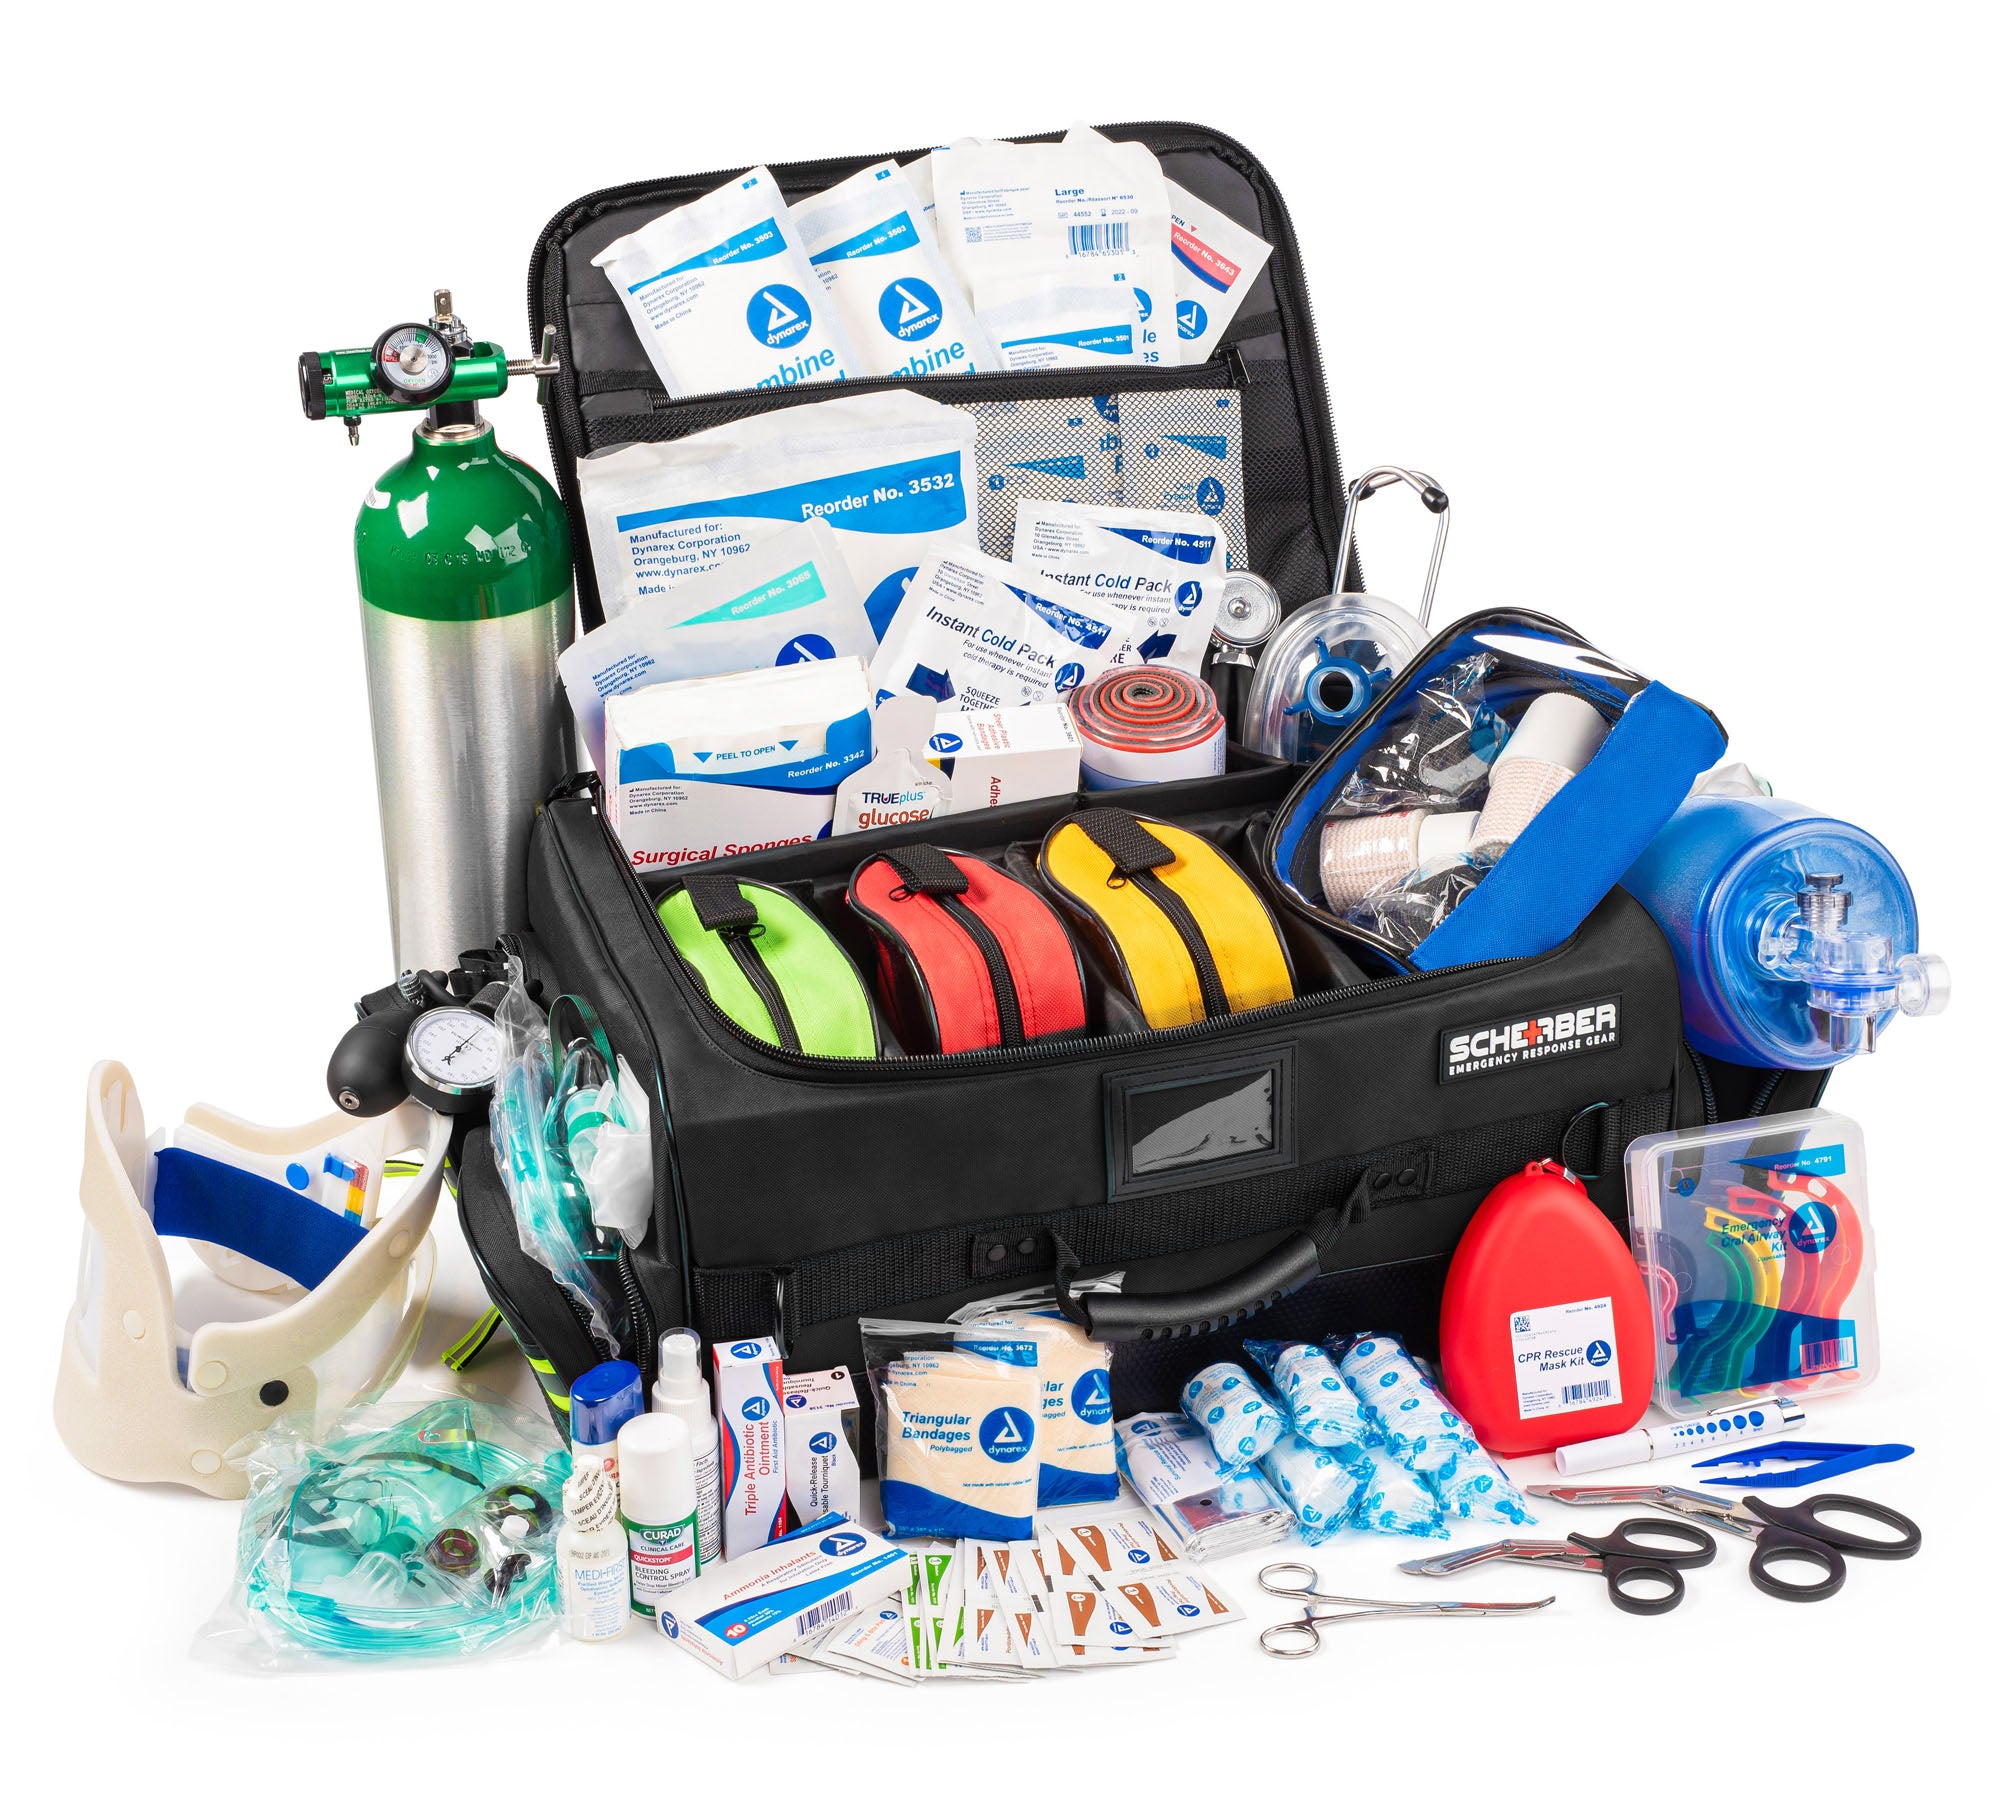 Scherber Fully Stocked First Responder Ultimate Professional EMT/EMS Trauma Kit | HSA/FSA Approved | w/10+ Compartments, Zippered Pockets, Dividers